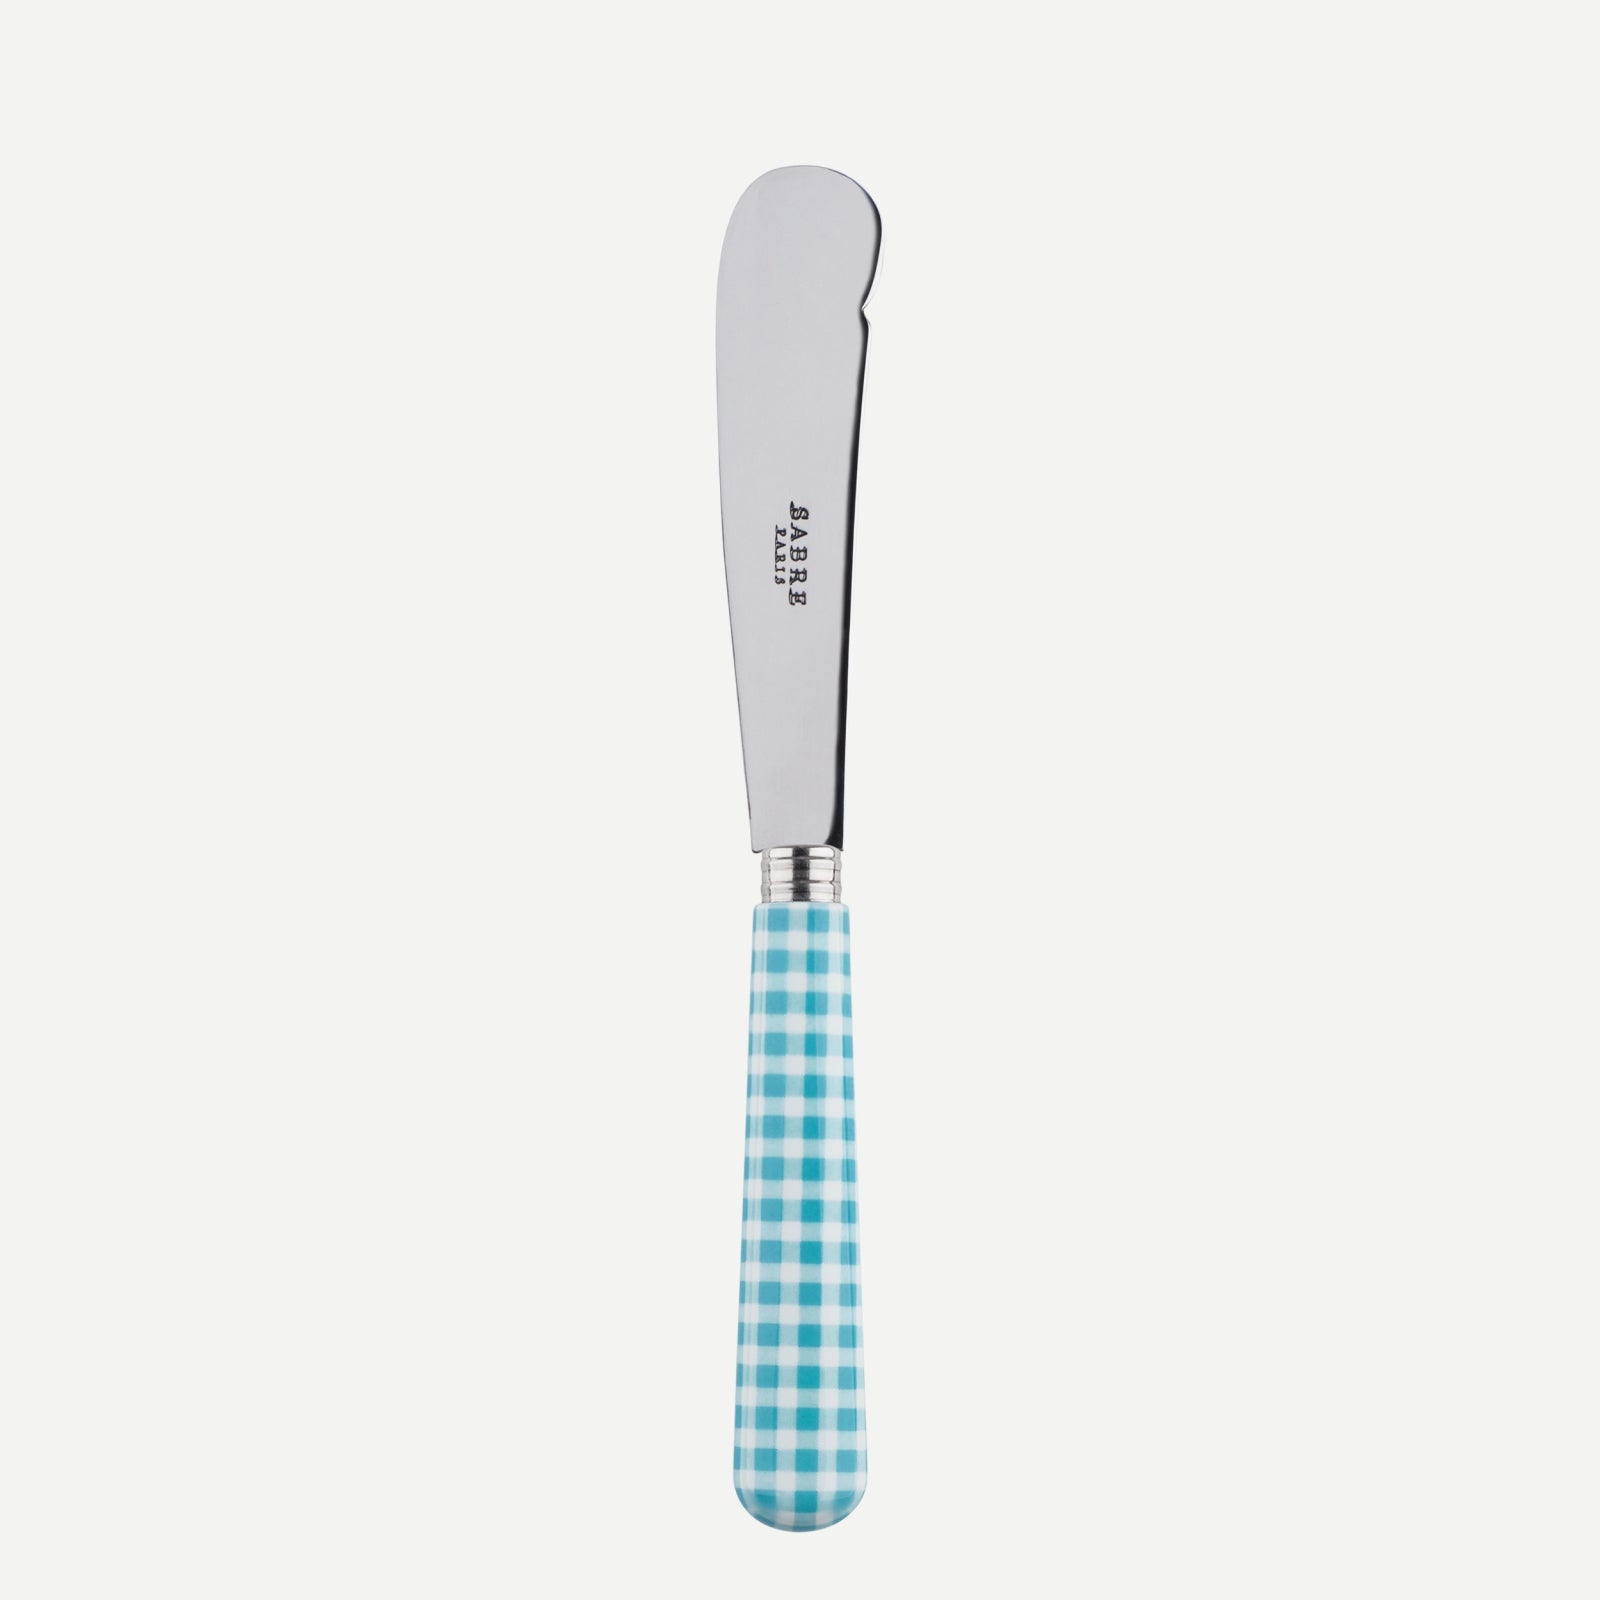 Butter knife - Gingham - Turquoise